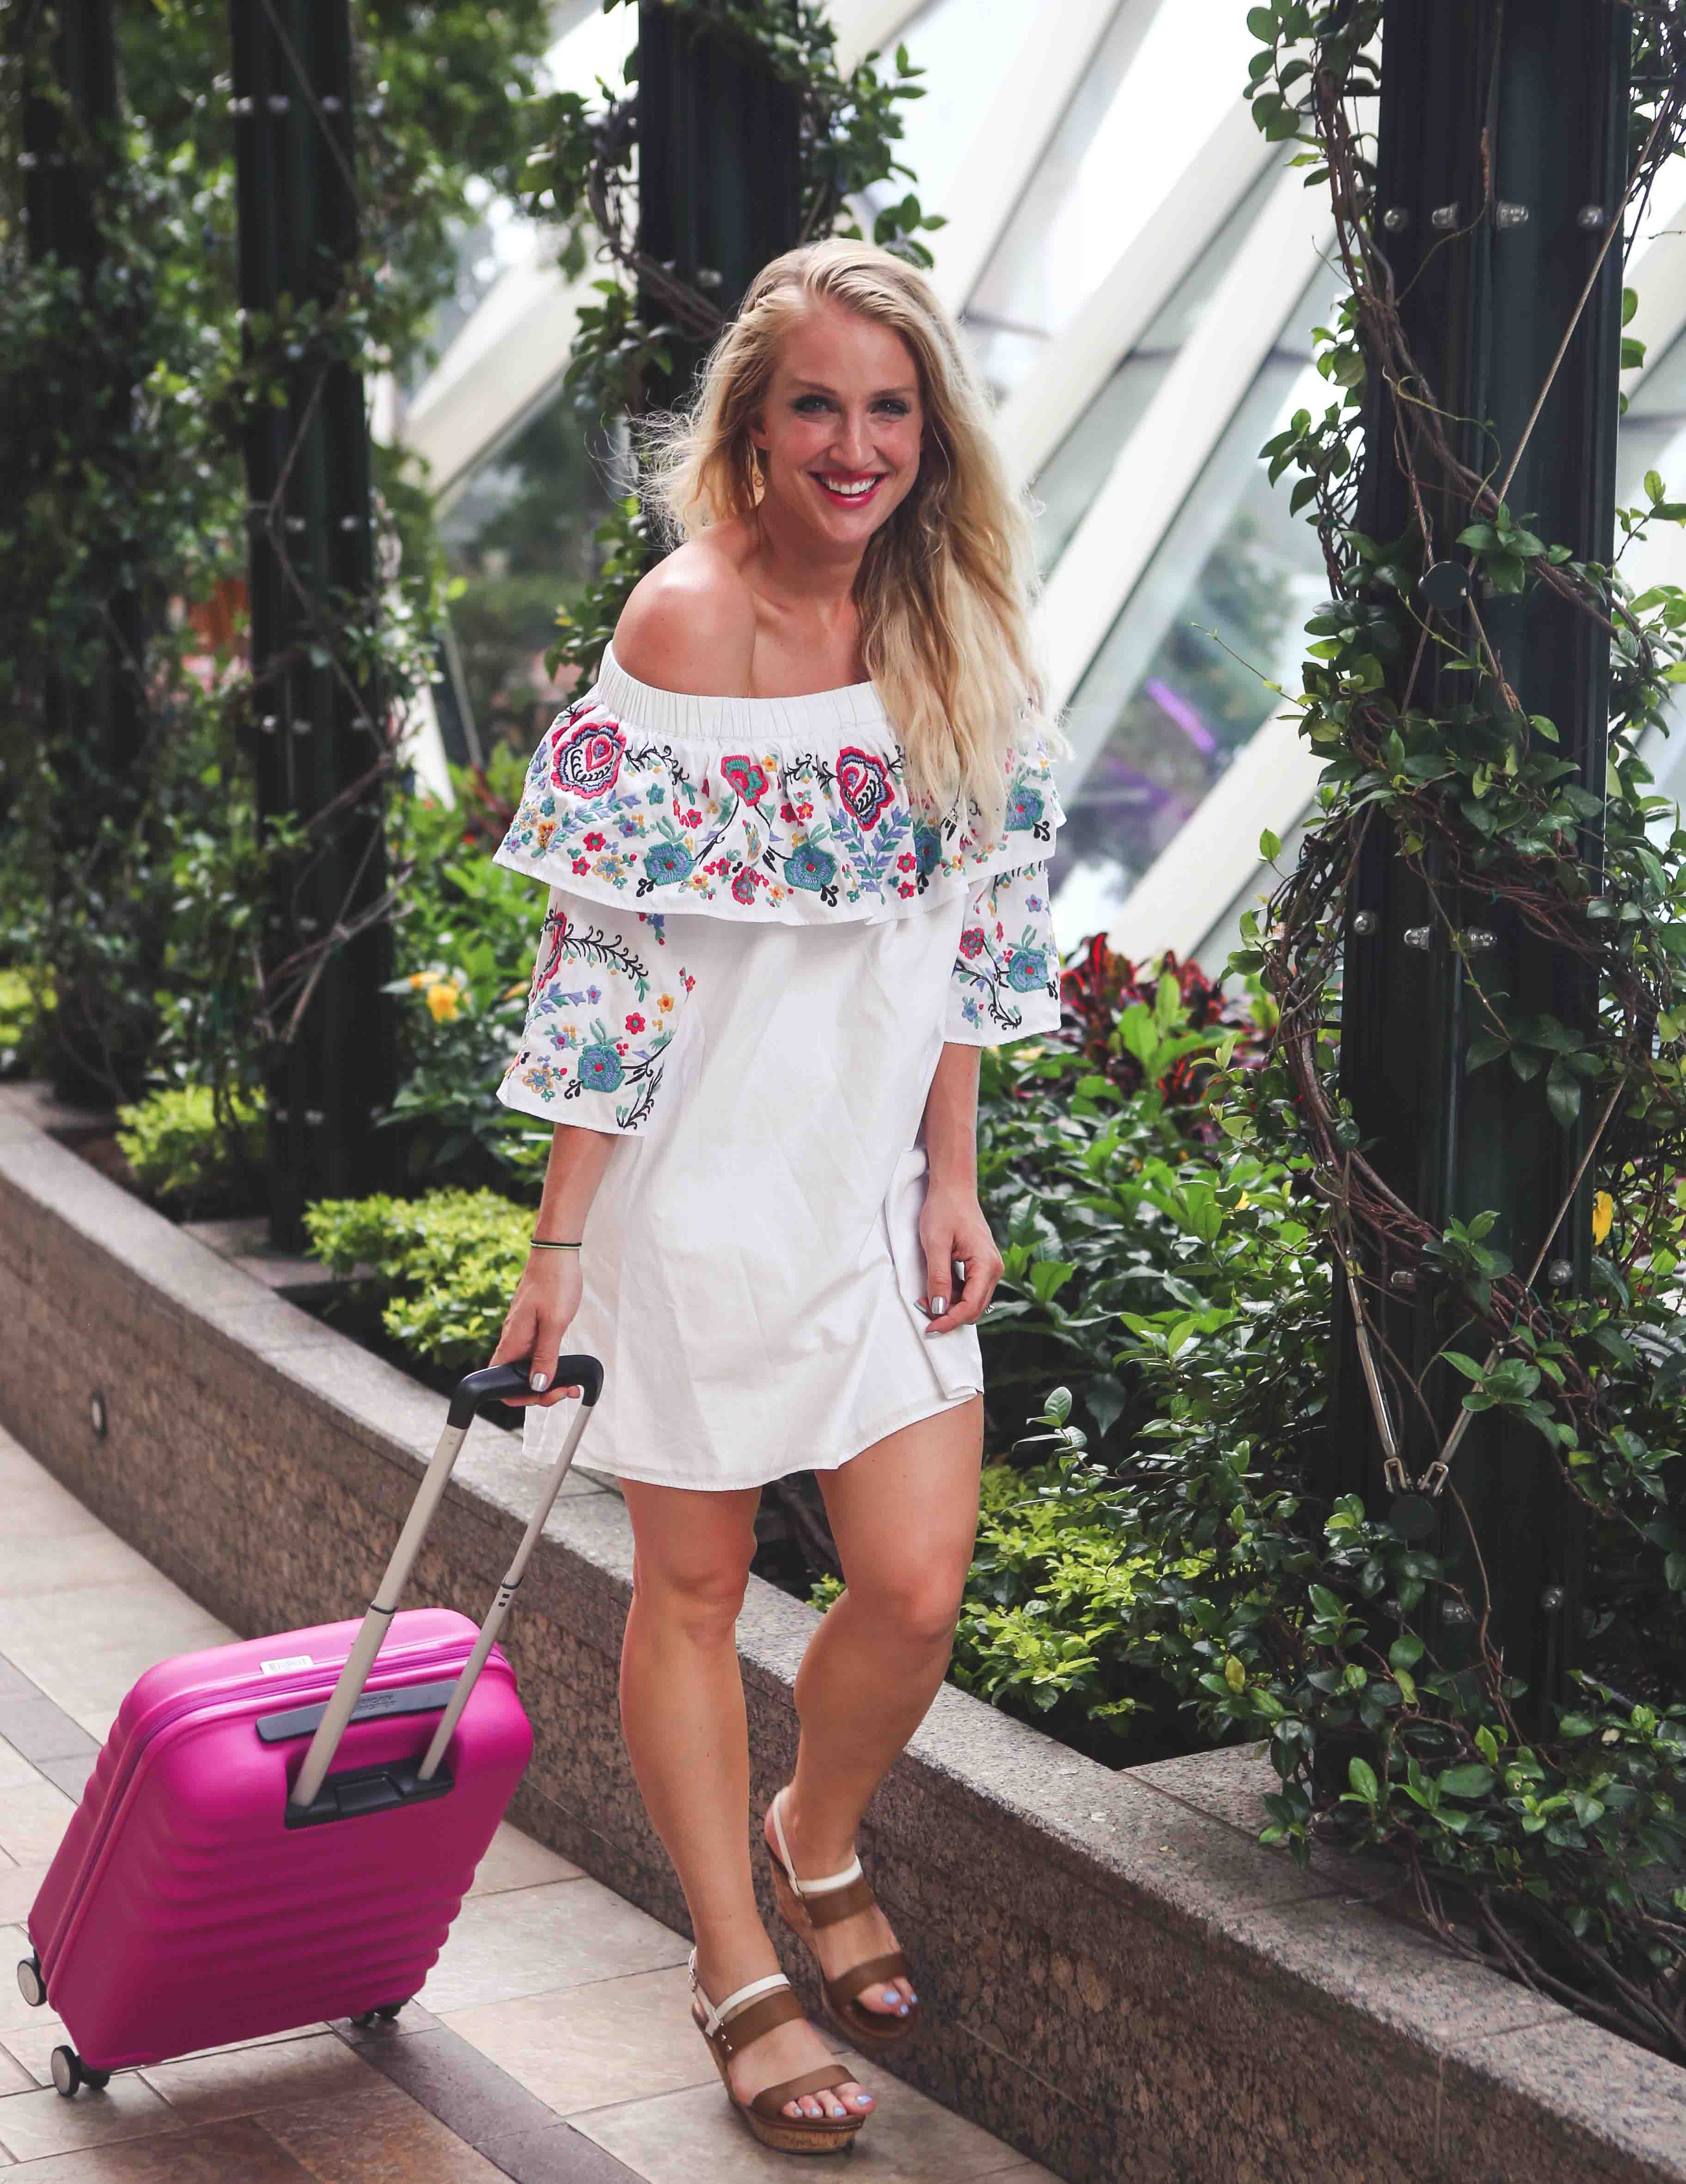 Packing Checklist for Girls' Getaway by Atlanta fitness blogger Happily Hughes